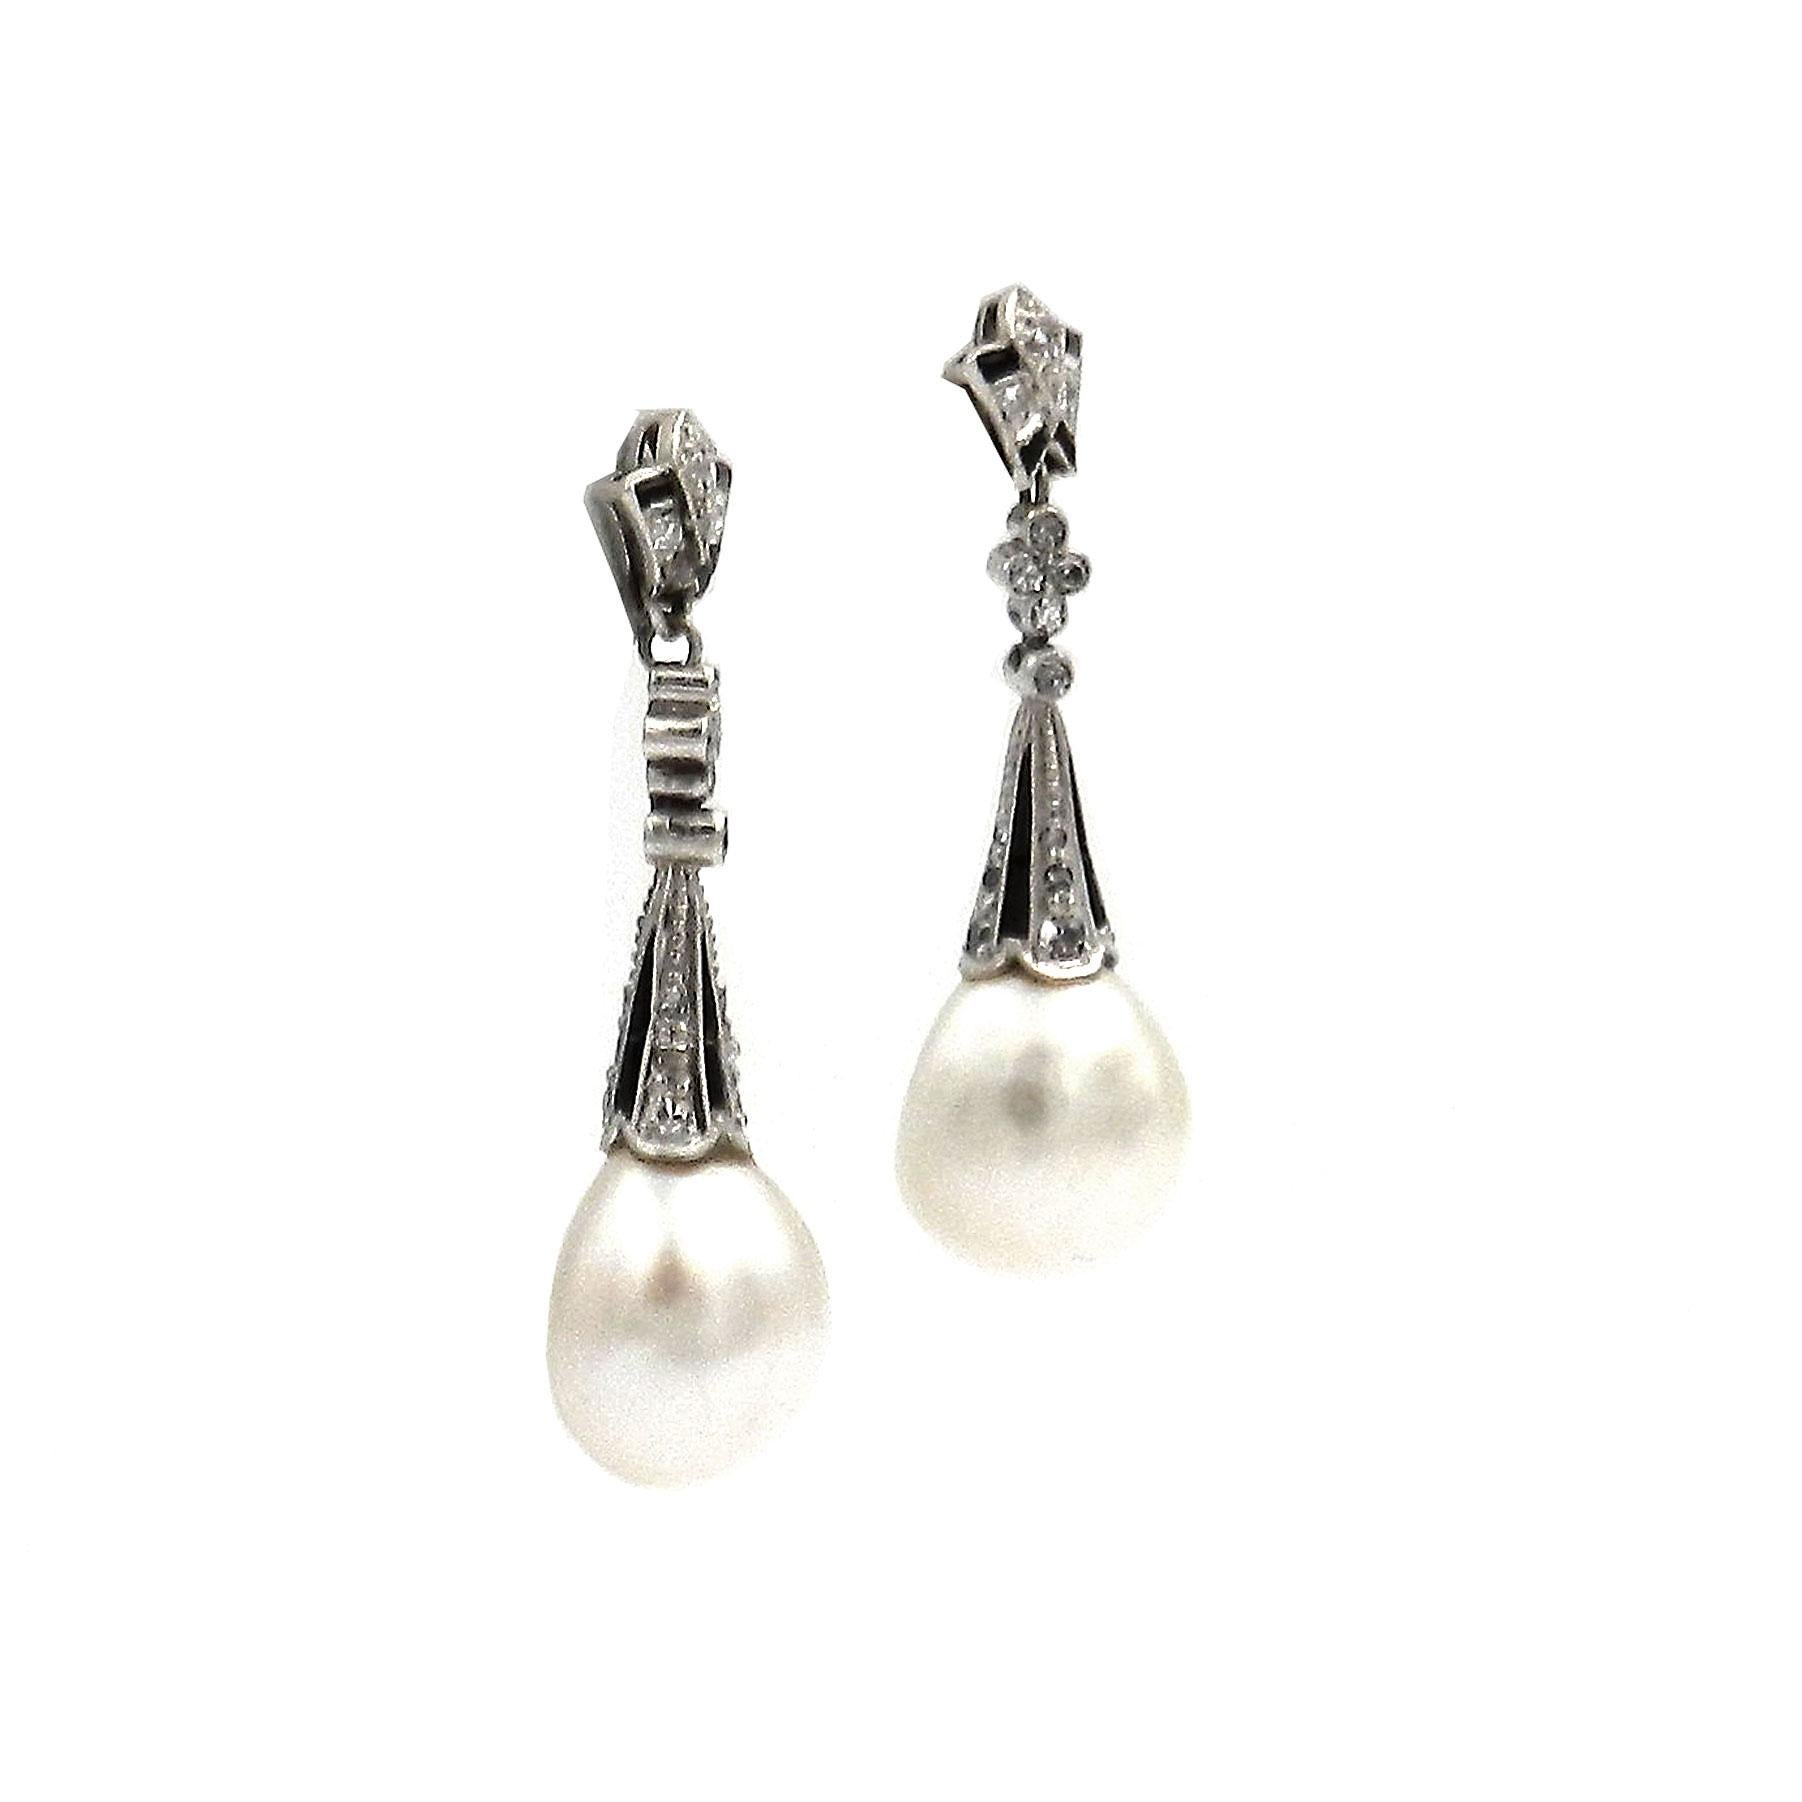 Art Deco Natural Pearl Onyx Diamond 18K White Gold Earrings, circa 1920

Elegant Art Deco earrings, each with a teardrop-shaped natural pearl in an attaché set with onyx triangles and radiant diamonds, movably mounted under a flower-shaped